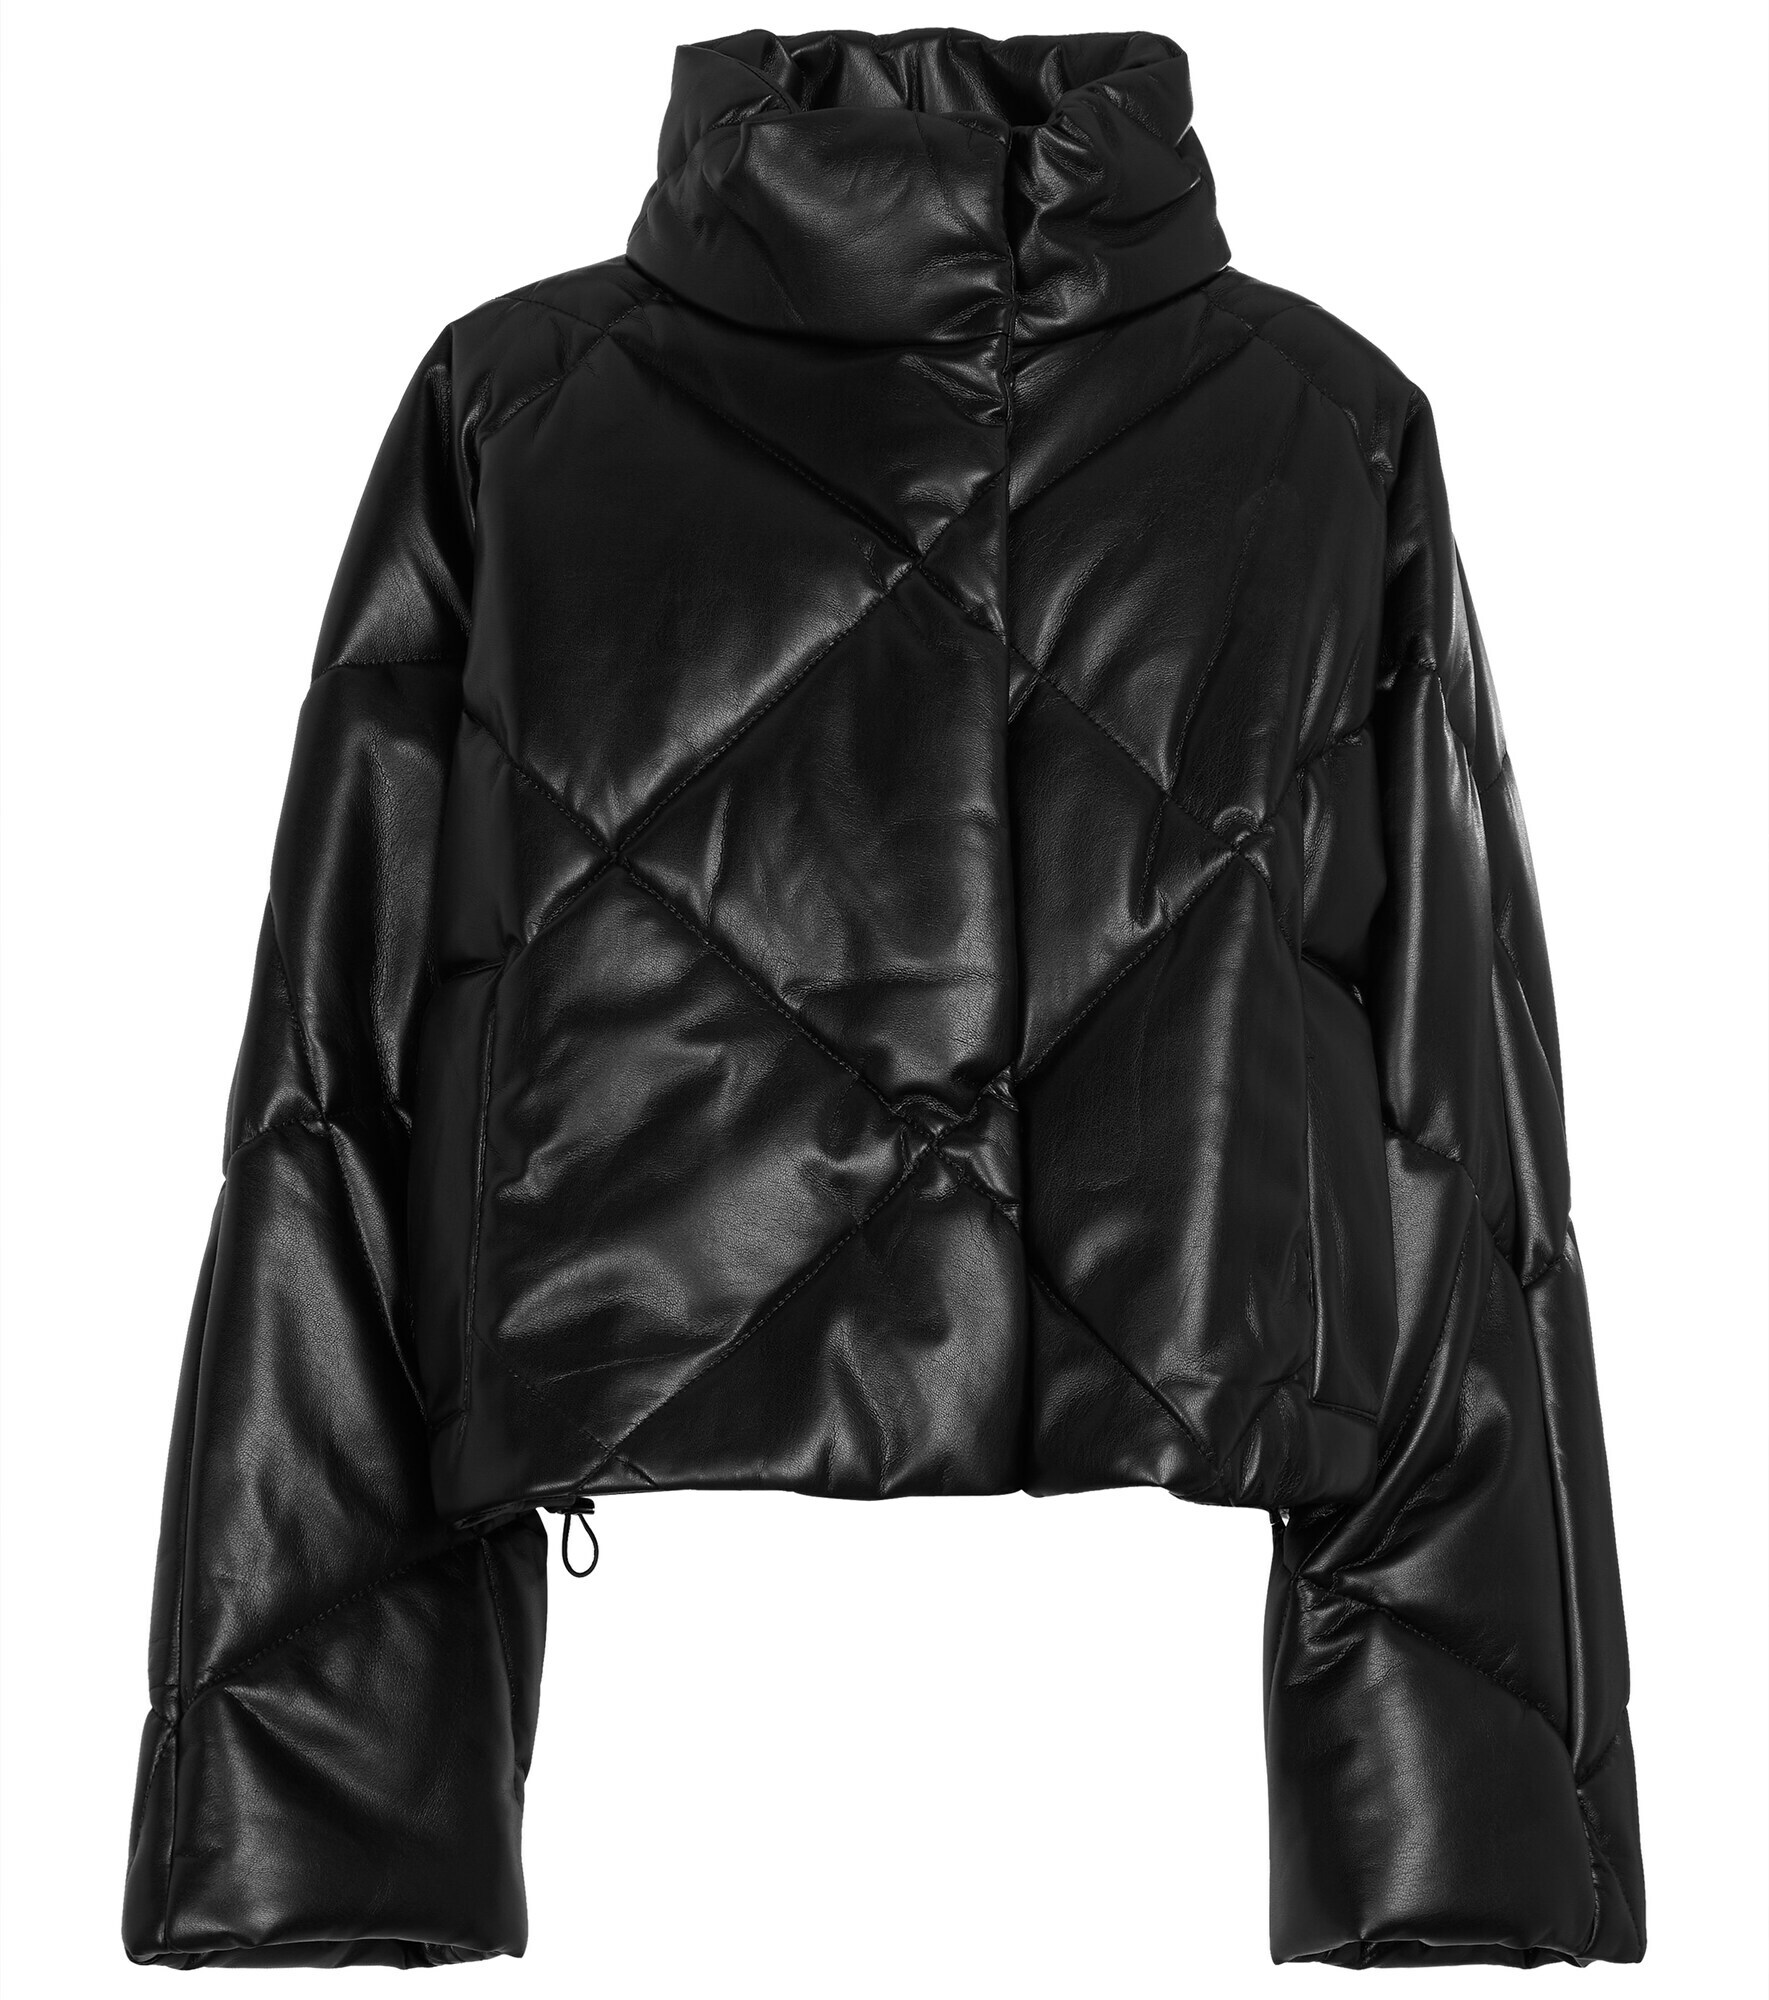 Stand Studio - Aina padded faux leather jacket Stand Studio